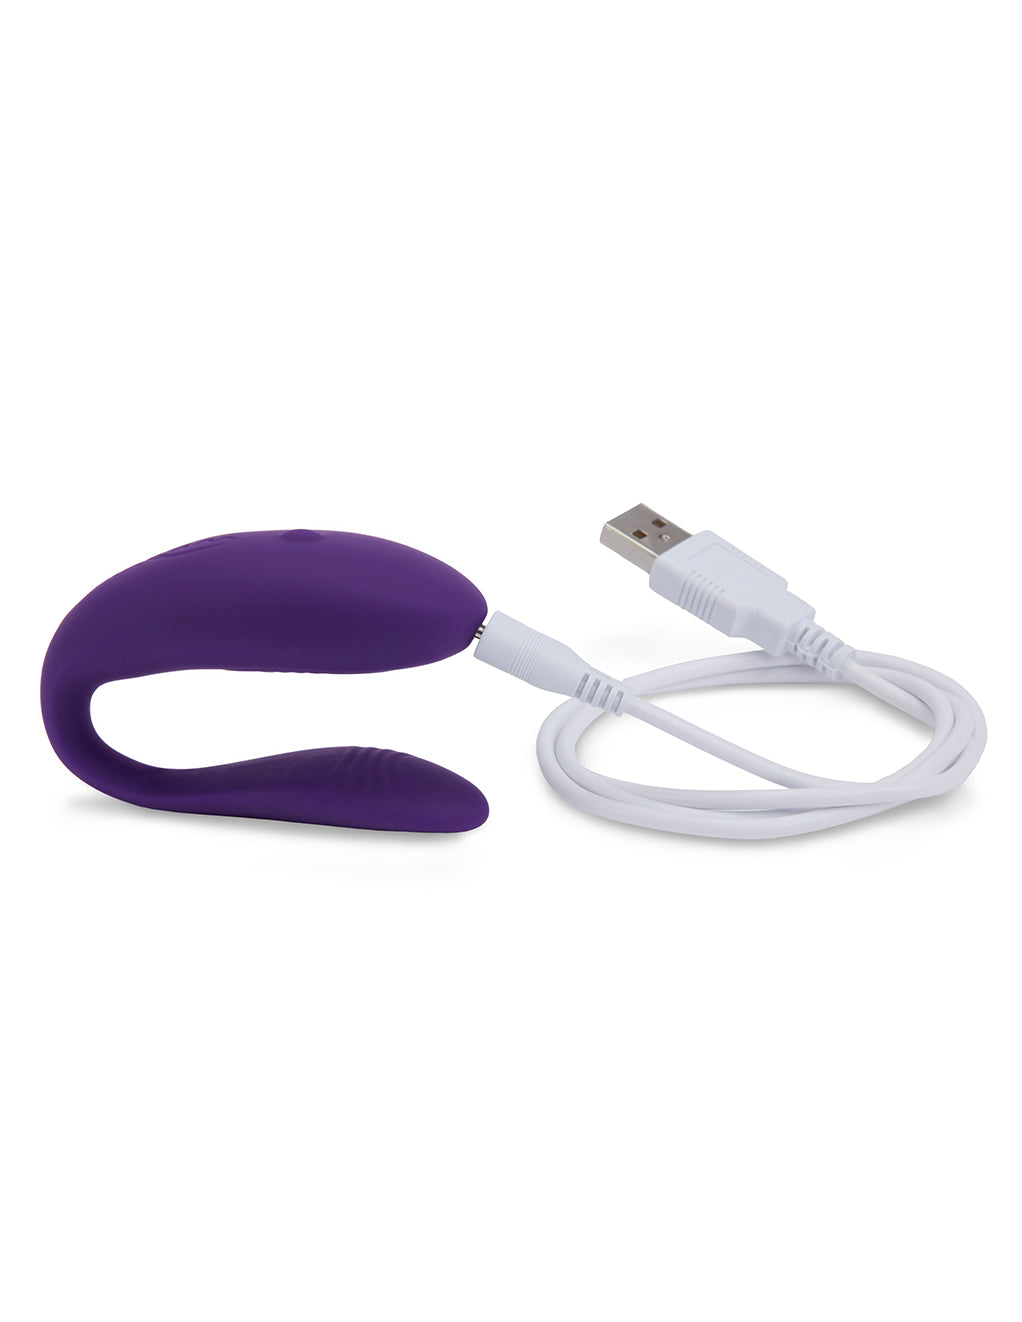 We-Vibe Unite Version 2- Plugged in Charger